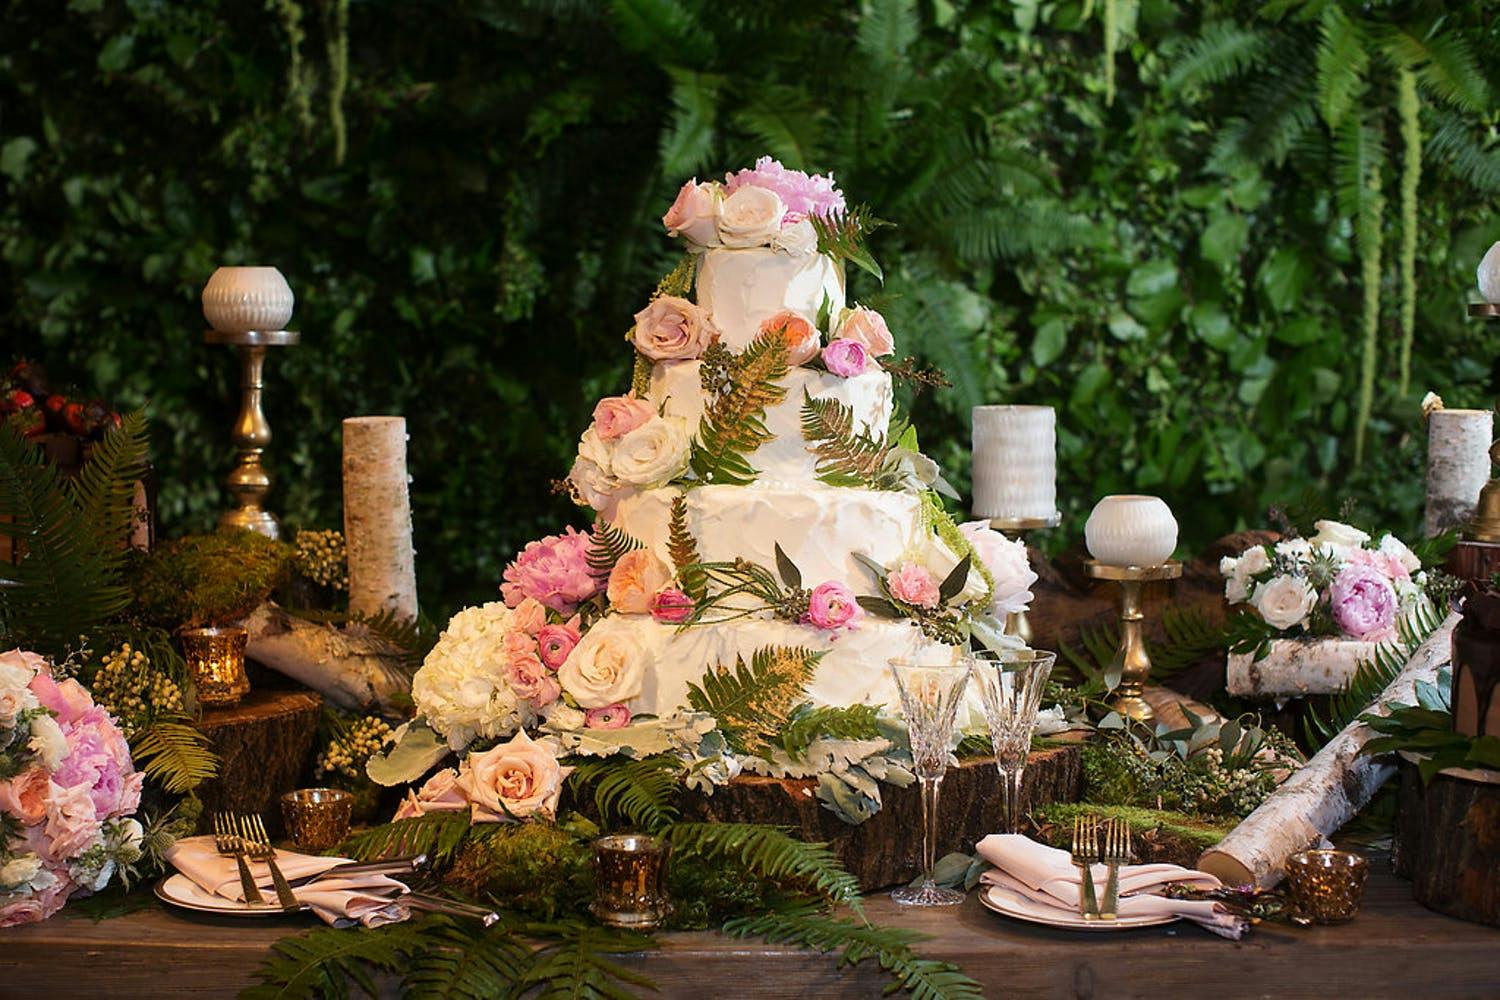 40+ Brilliant Enchanted Forest Theme Ideas For Your Party | Enchanted  forest cake, Forest theme cakes, Enchanted forest party